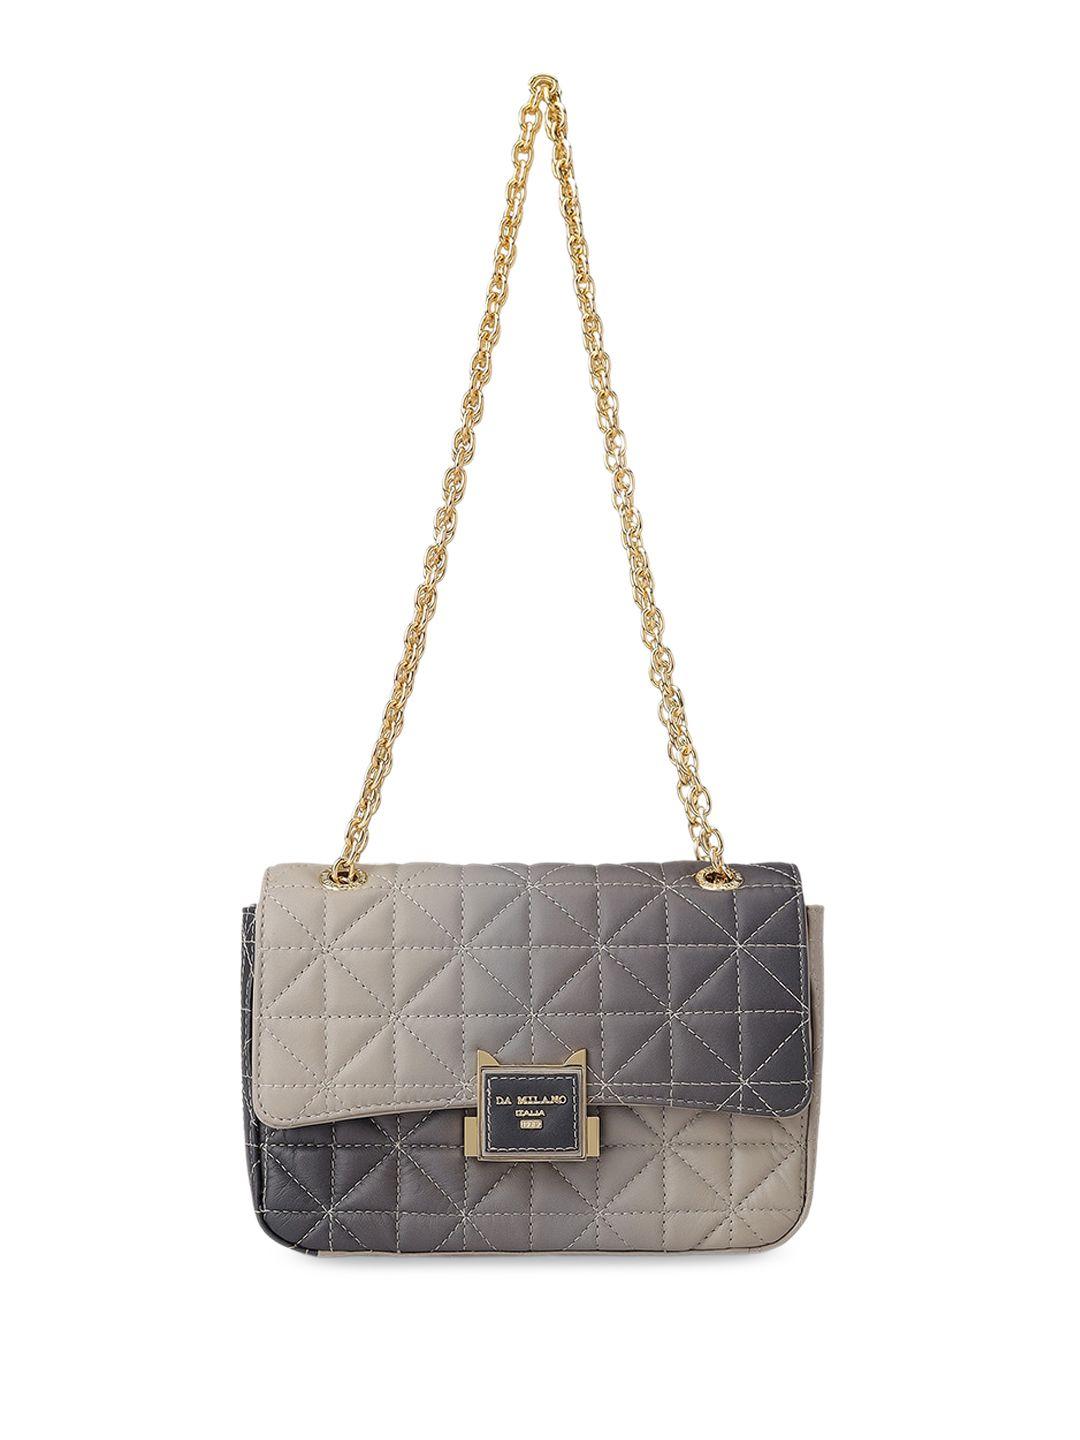 da milano quilted textured leather structured sling bag